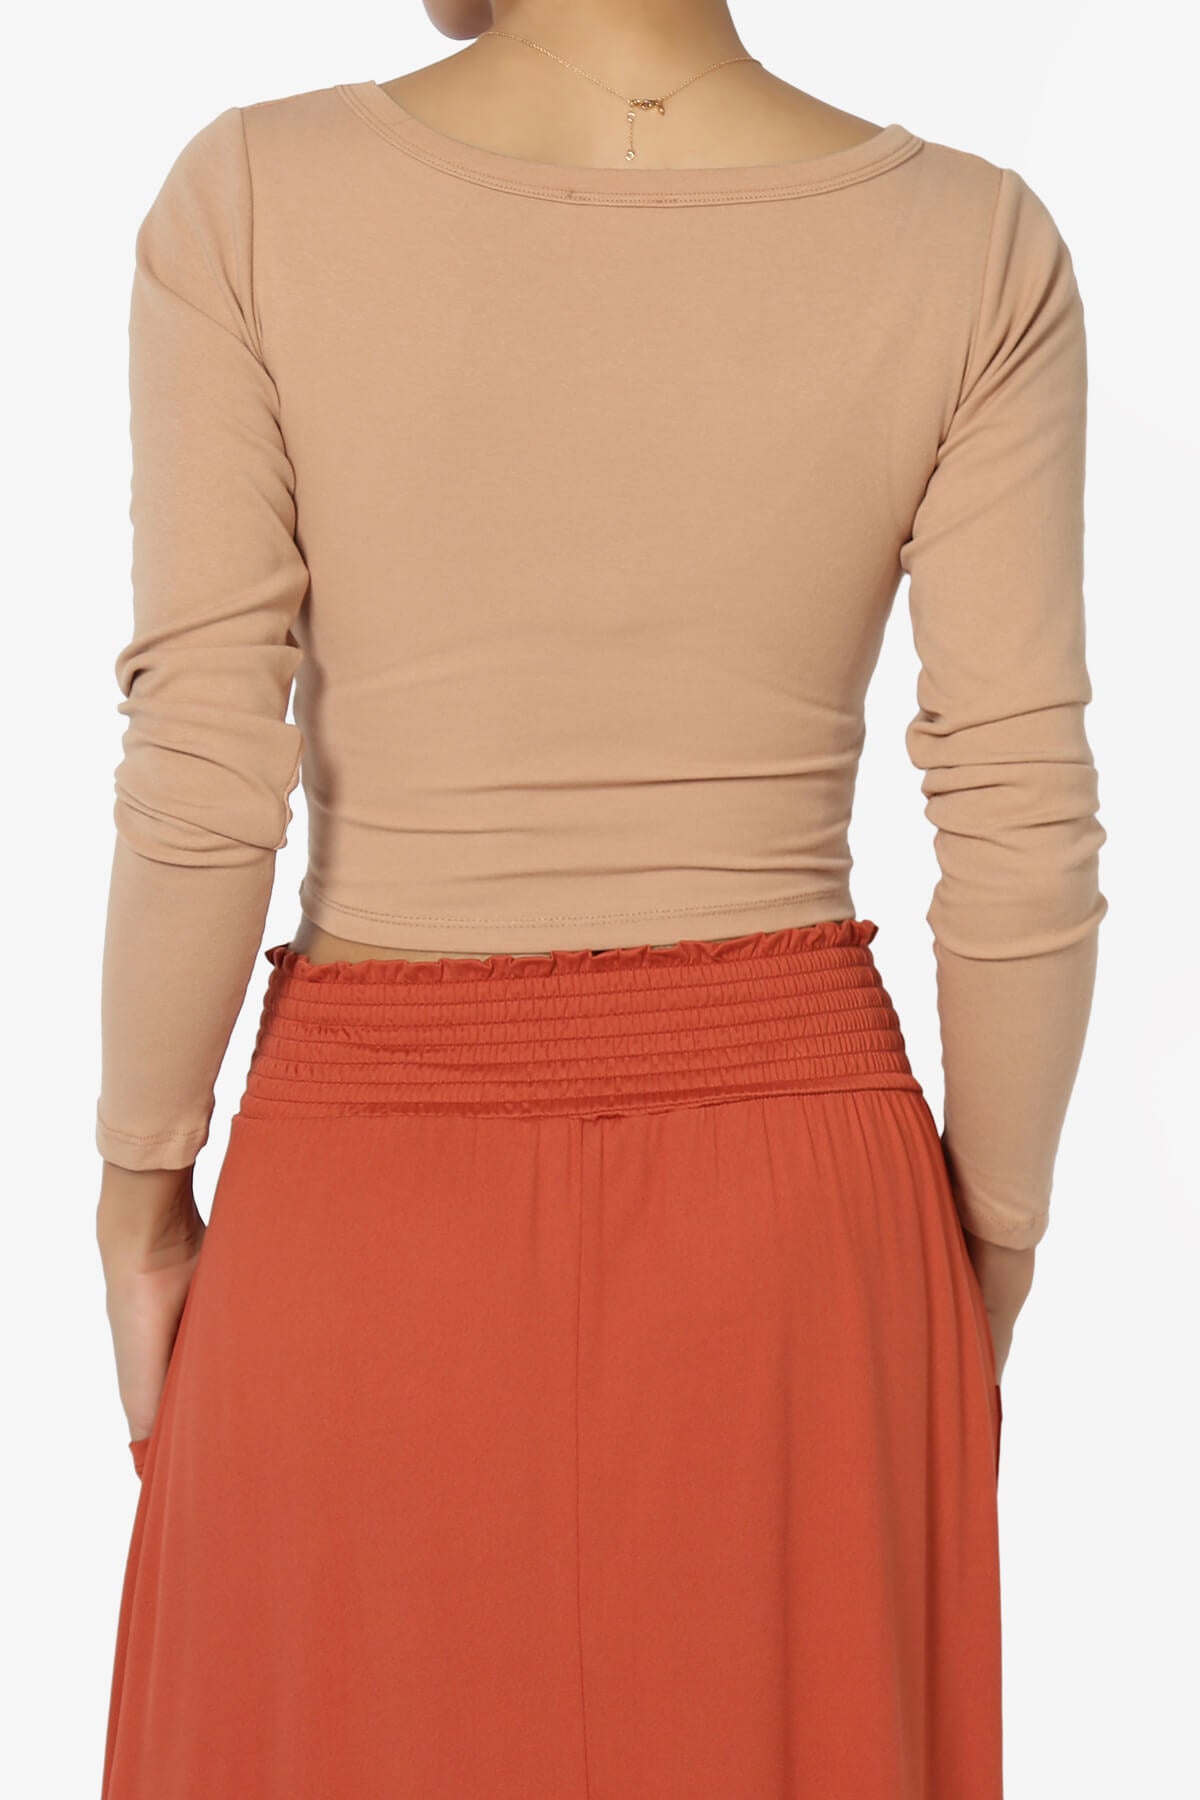 A2Y Women's Basic Solid Stretchable Scoop Neck Long Sleeve Crop Top Orange S